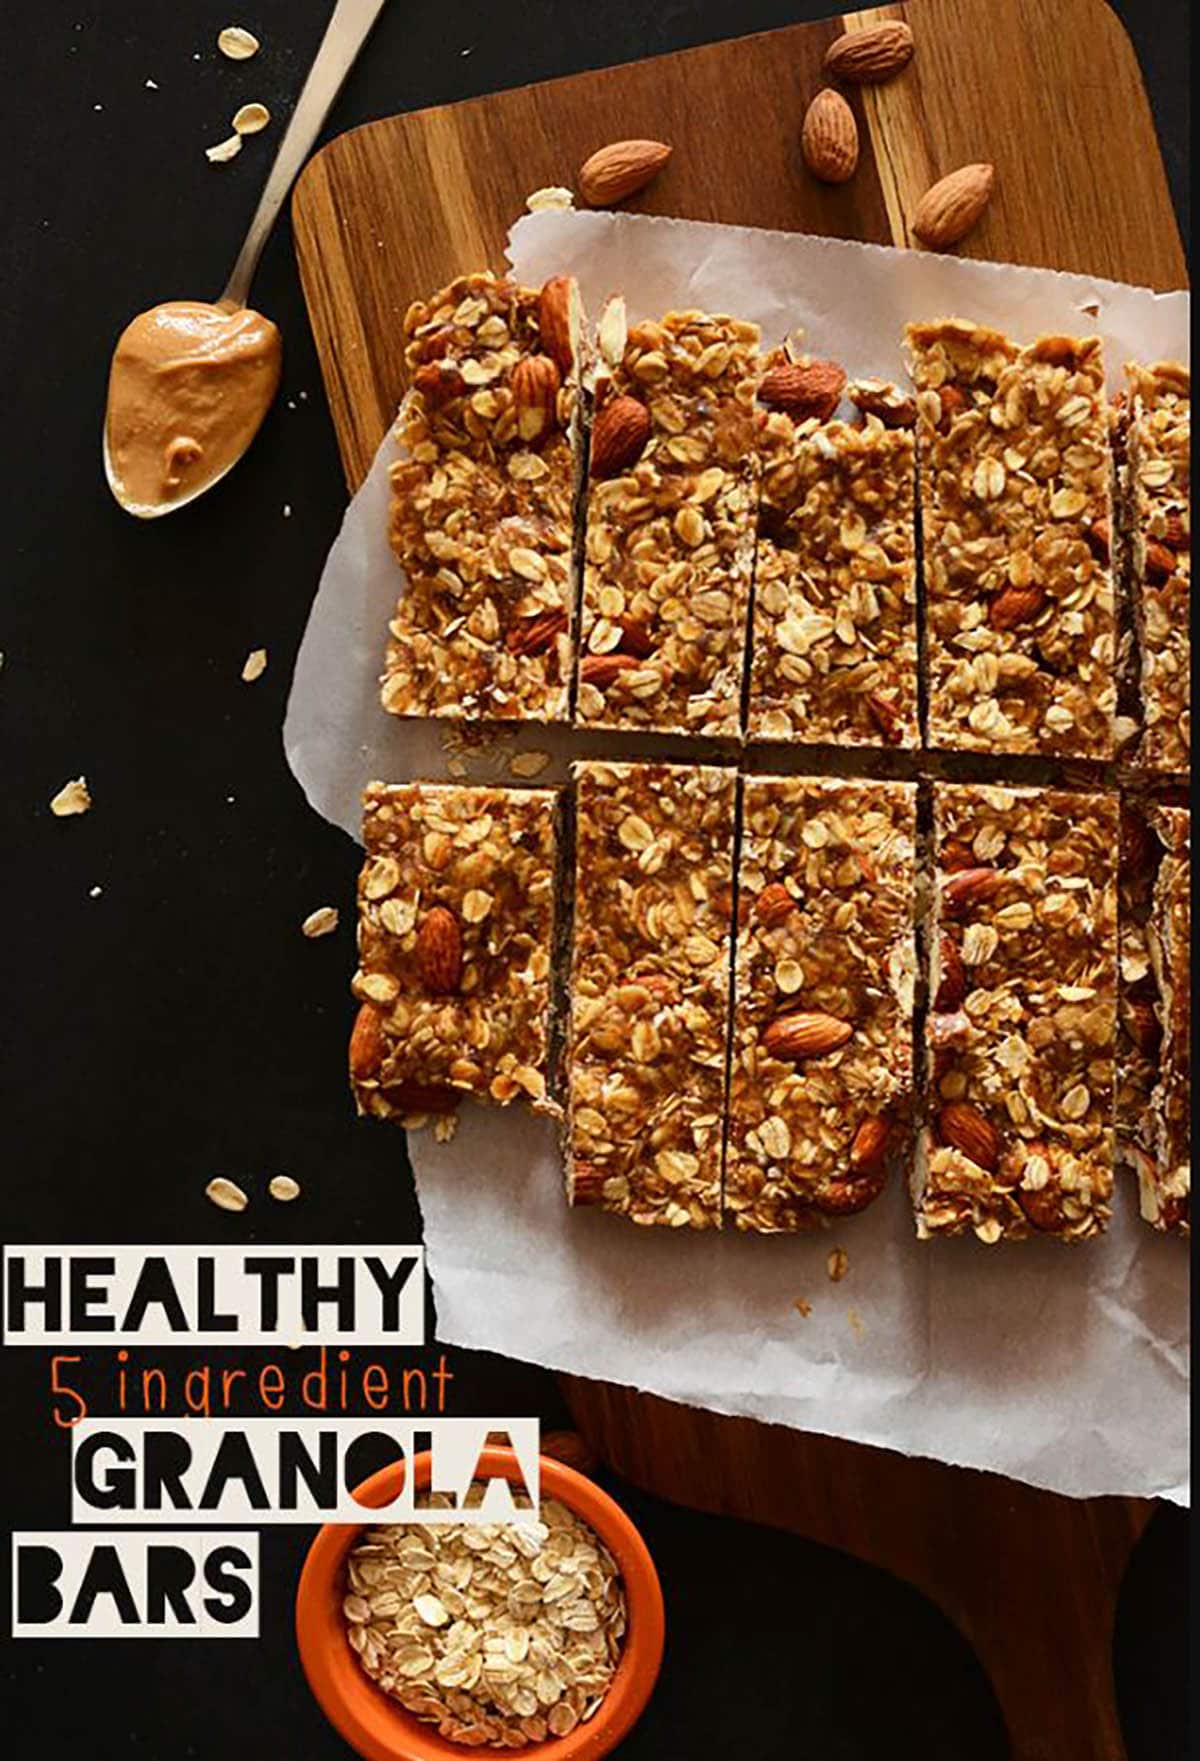 5 Ingredient Granola Bars on a wooden board